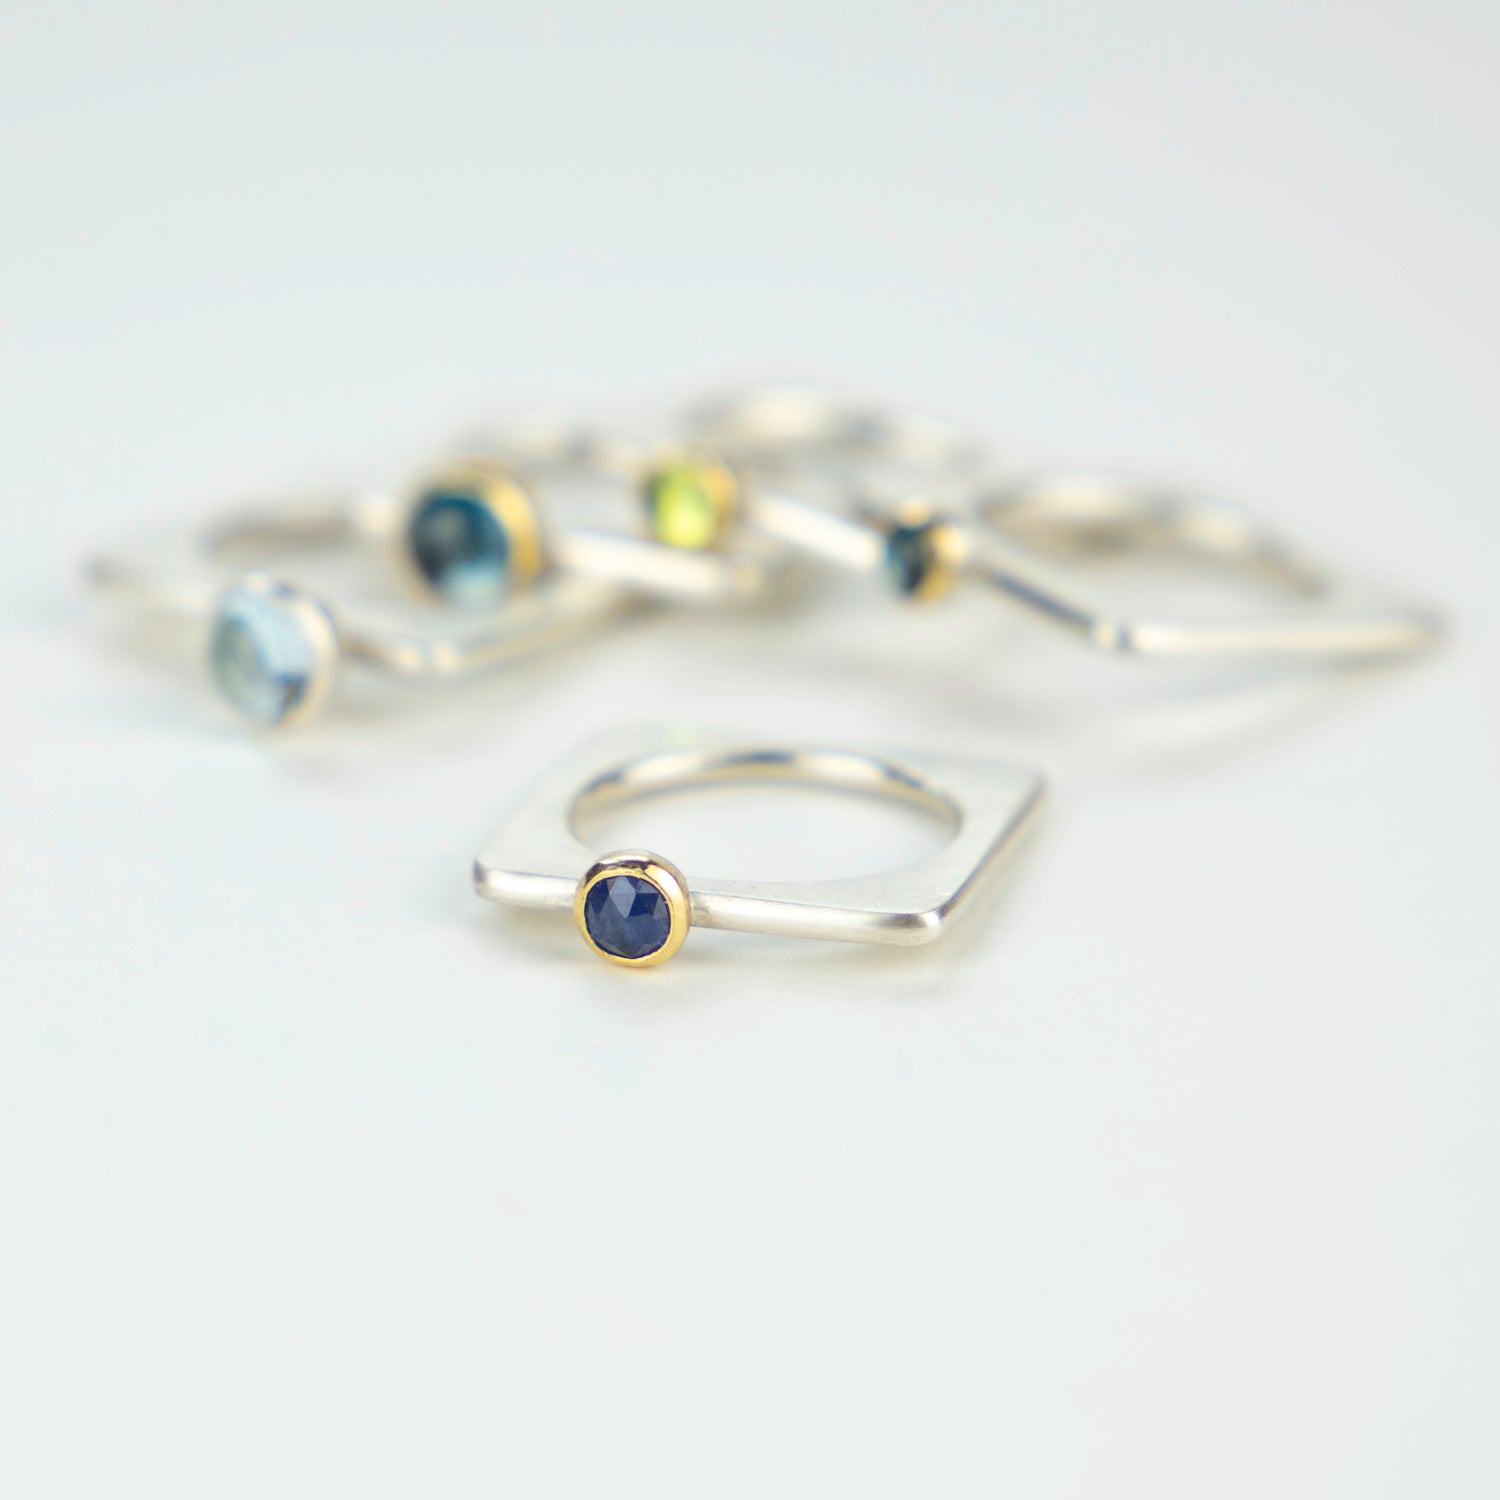 Sapphire ring and square stacking rings www.barbaraspence.co.uk